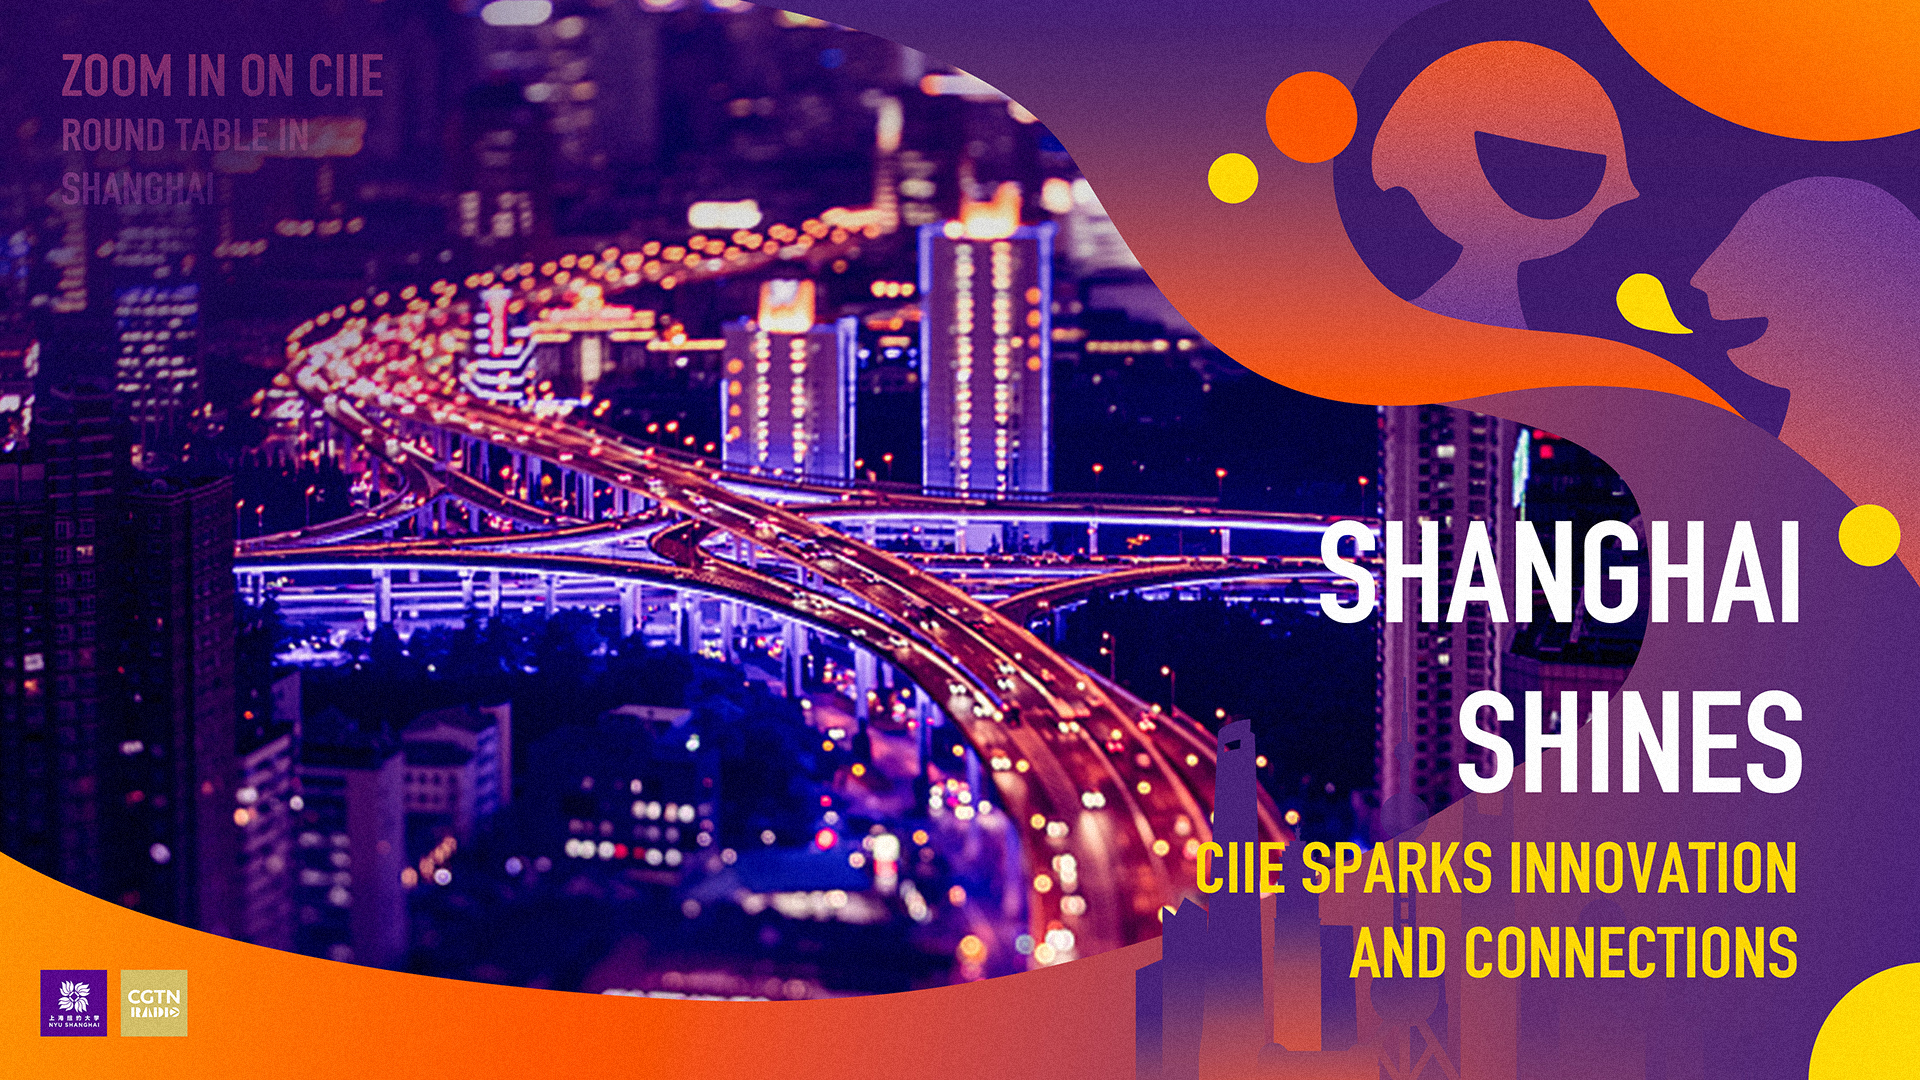 Watch: Shanghai shines – CIIE sparks innovation and connections